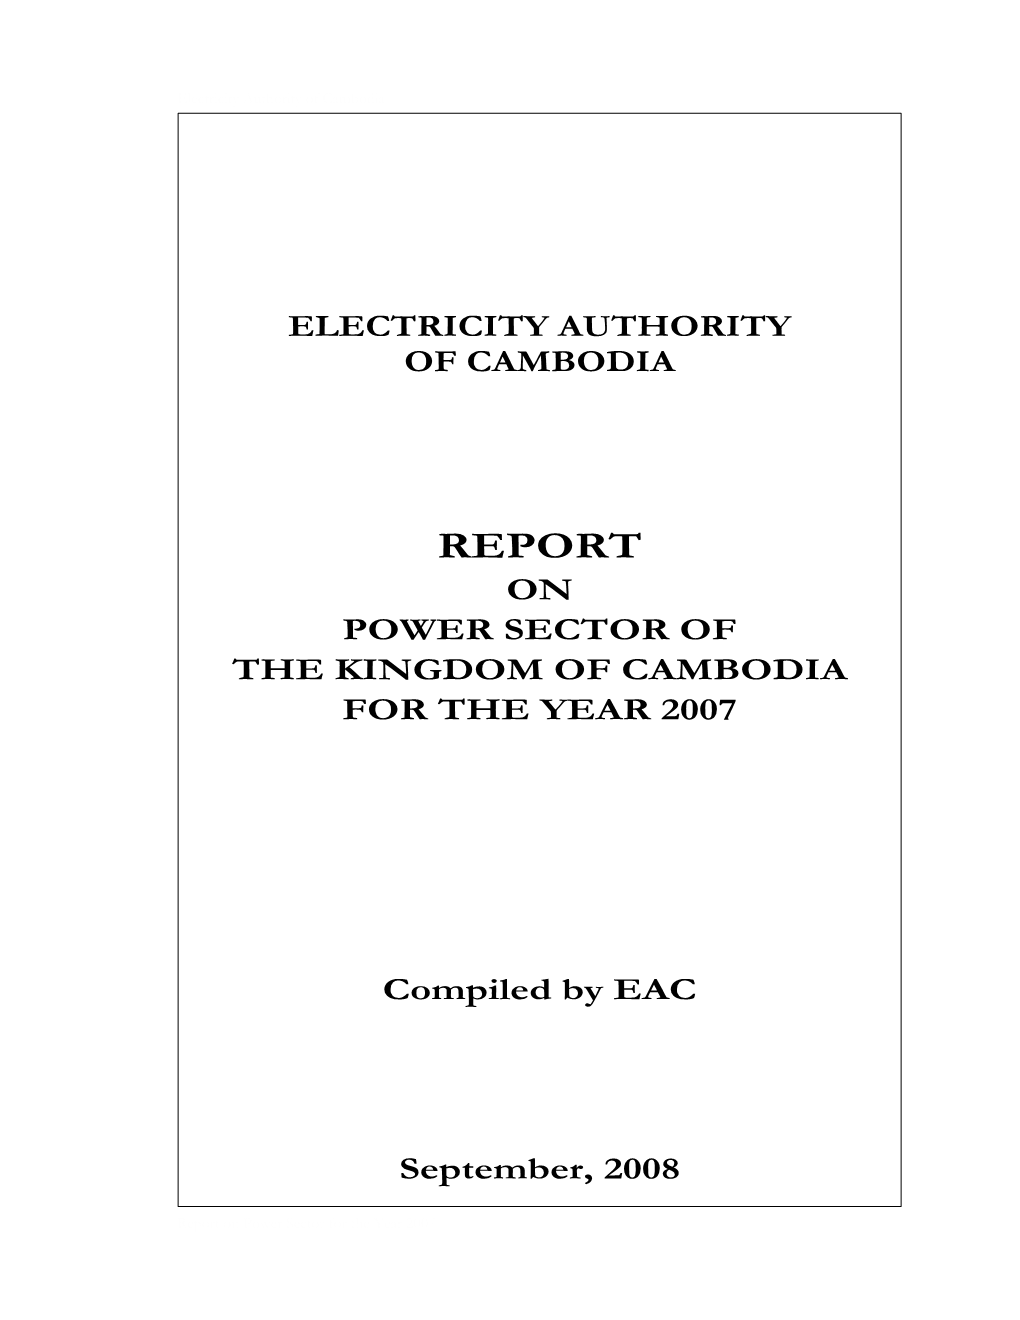 Report on Power Sector of the Kingdom of Cambodia for the Year 2007